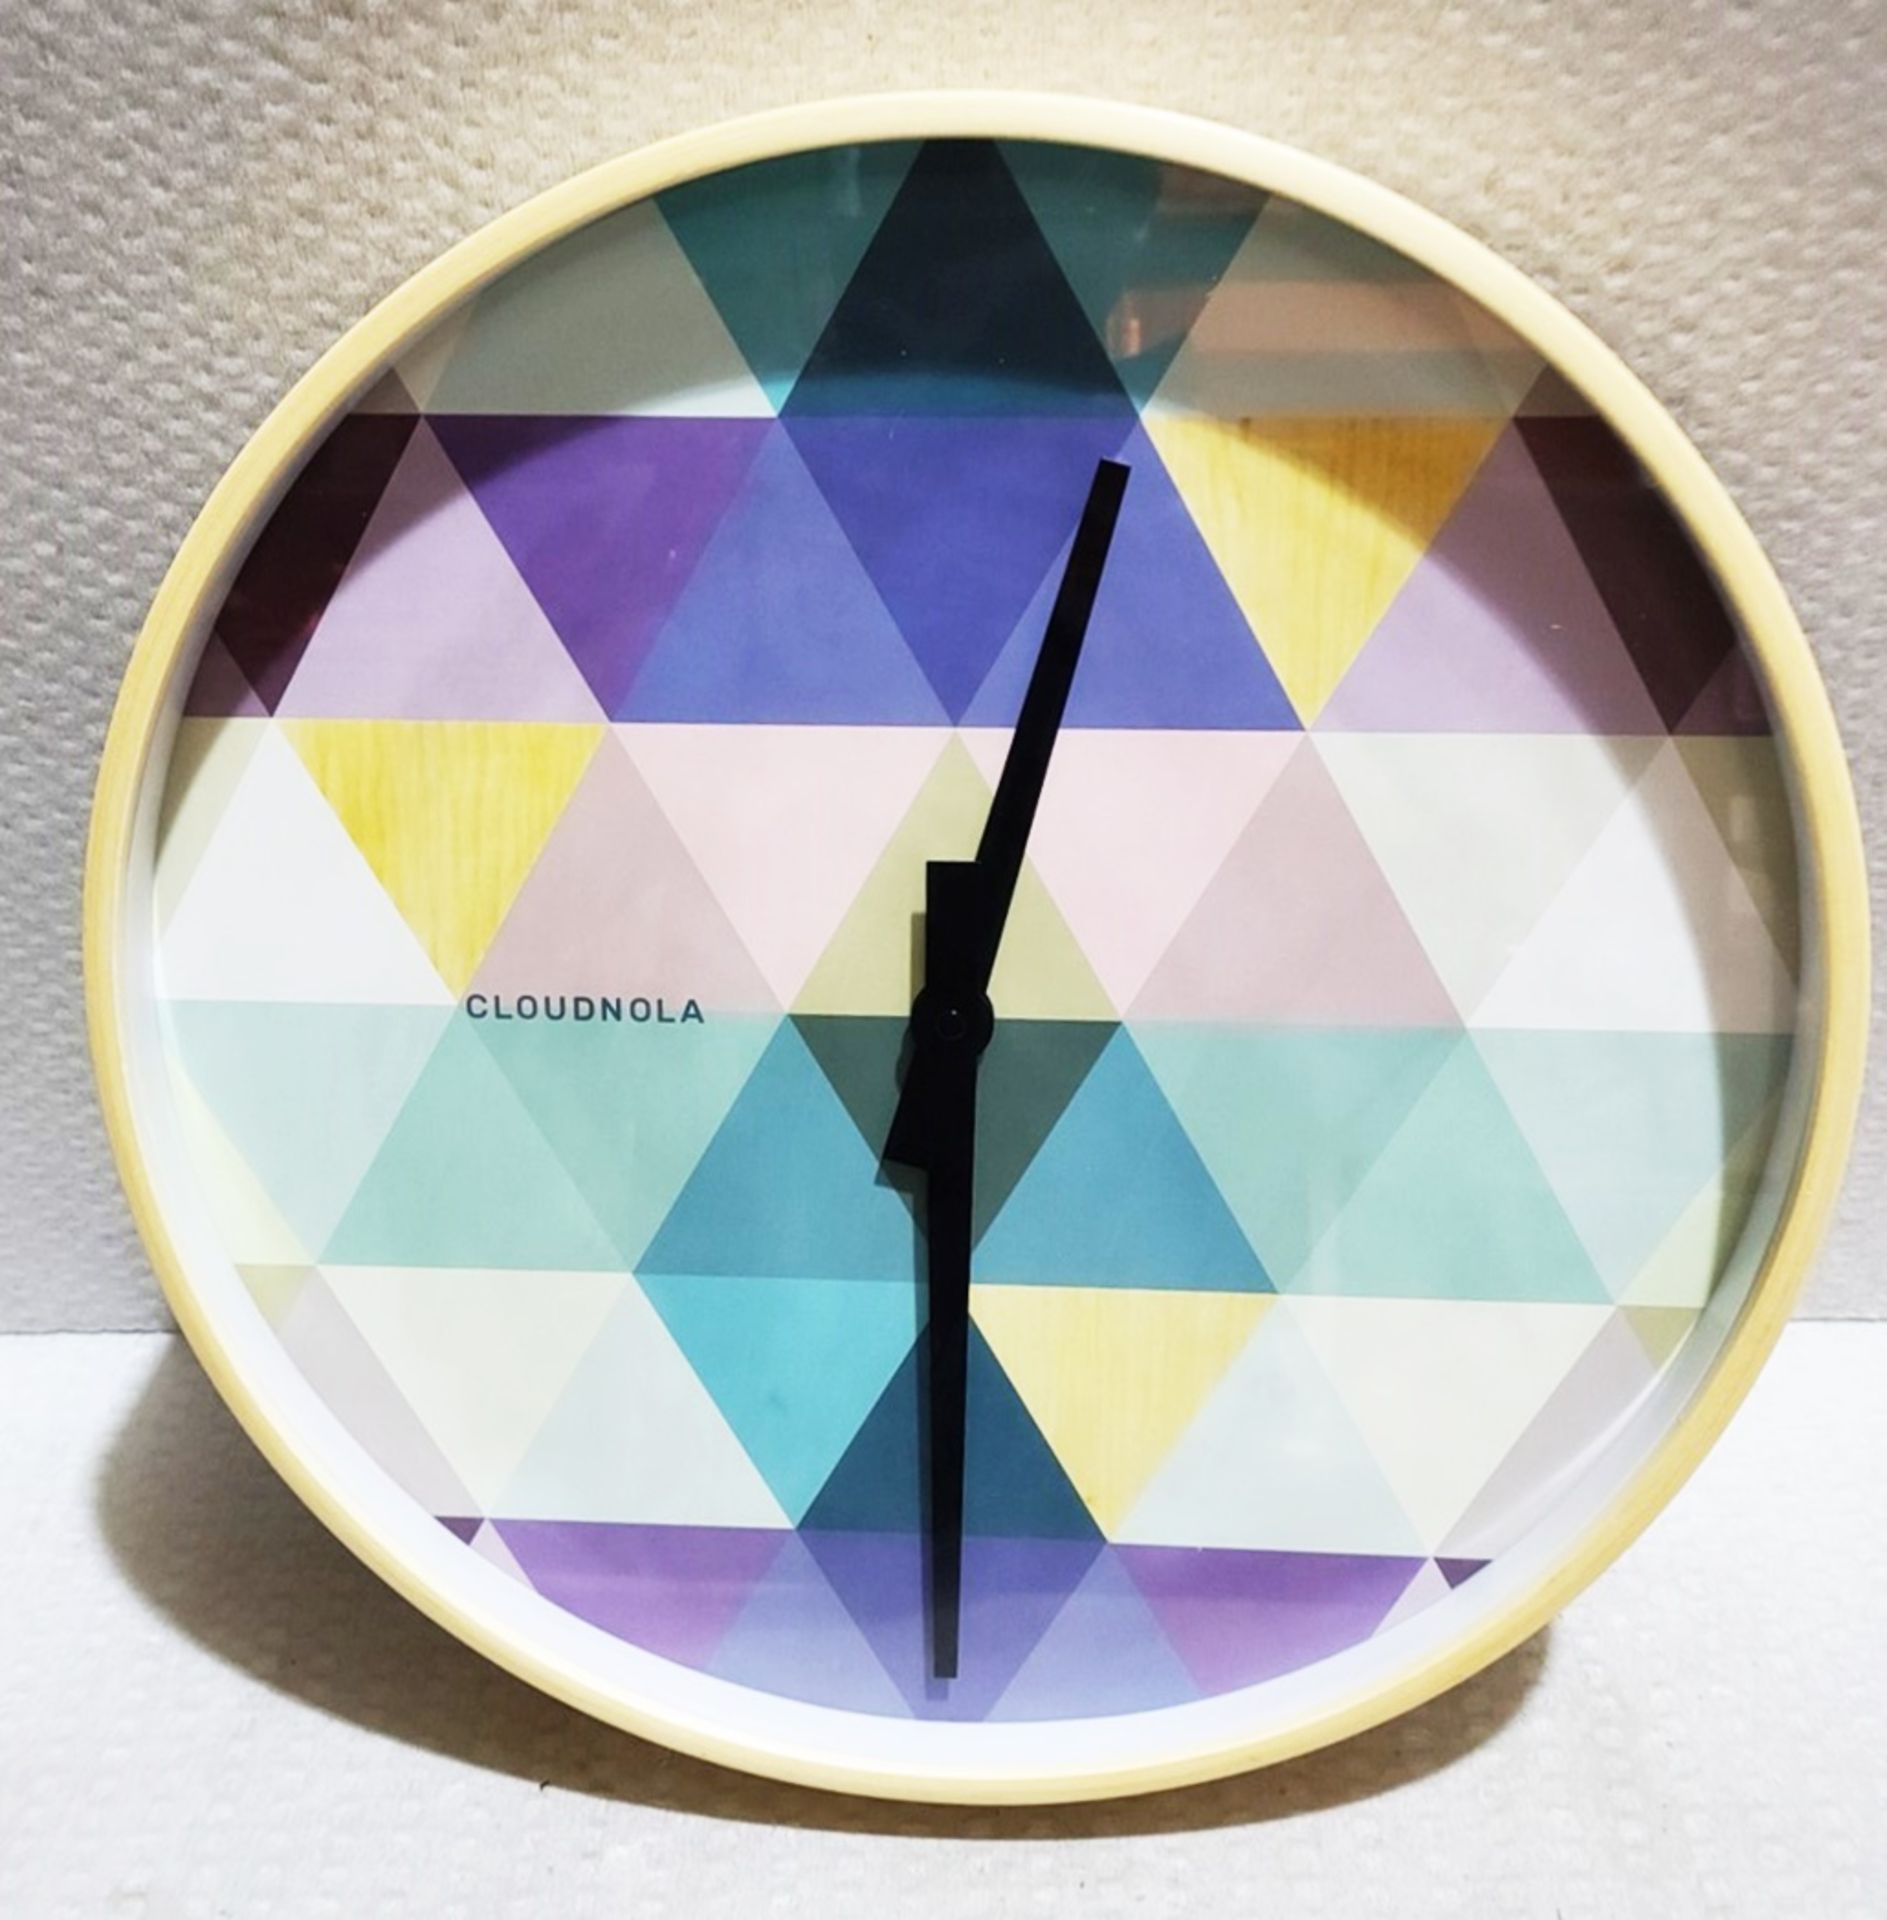 1 x CLOUDNOLA Tonic Blue Wooden Wall Clock With Geometric Pastel Patterned Birch Wood 40cm - Image 5 of 7